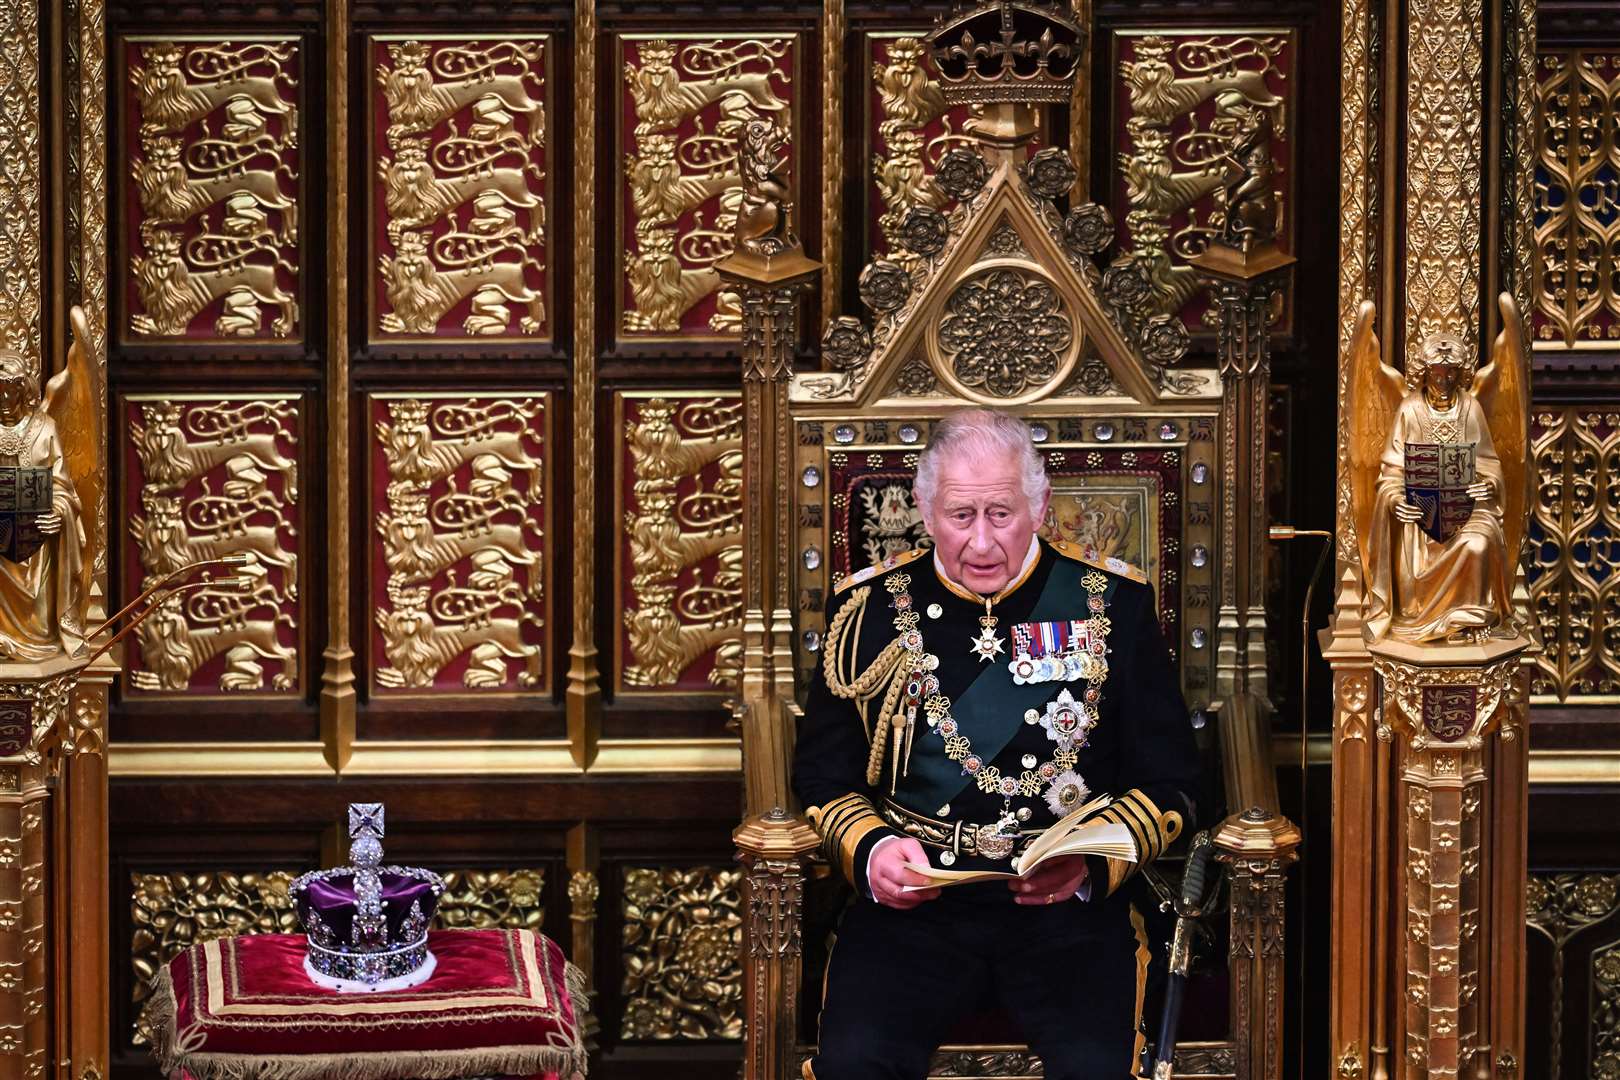 Charles reads the Queen’s Speech as he sits next to the Imperial State Crown during the State Opening of Parliament last year (Ben Stansall/PA)